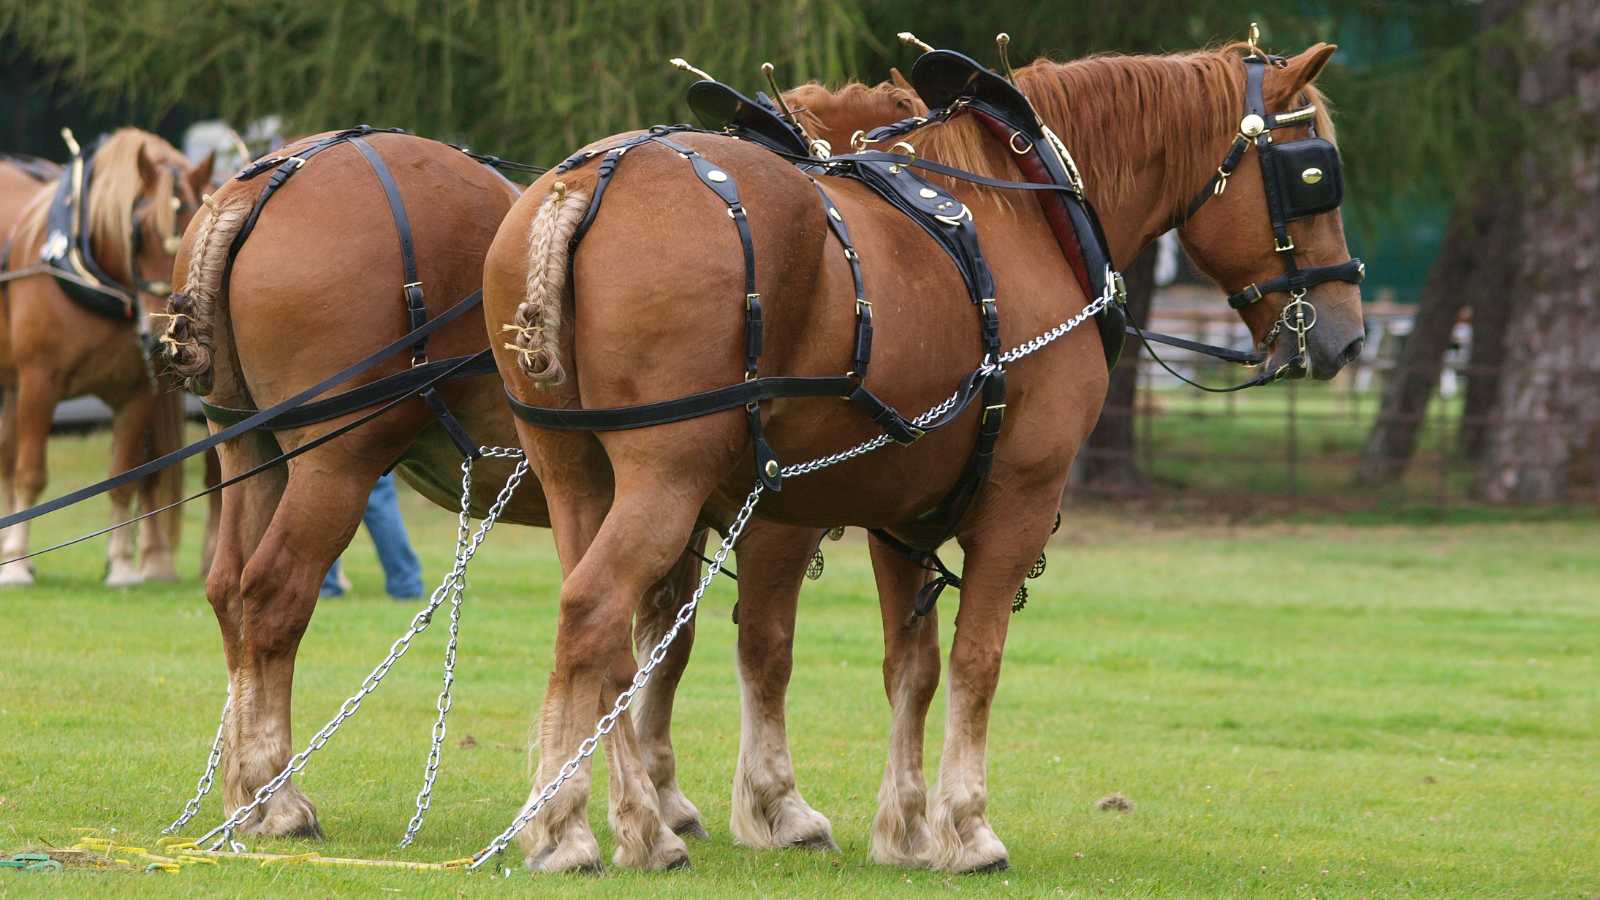 Two large brown draft horses hooked up to a plow.